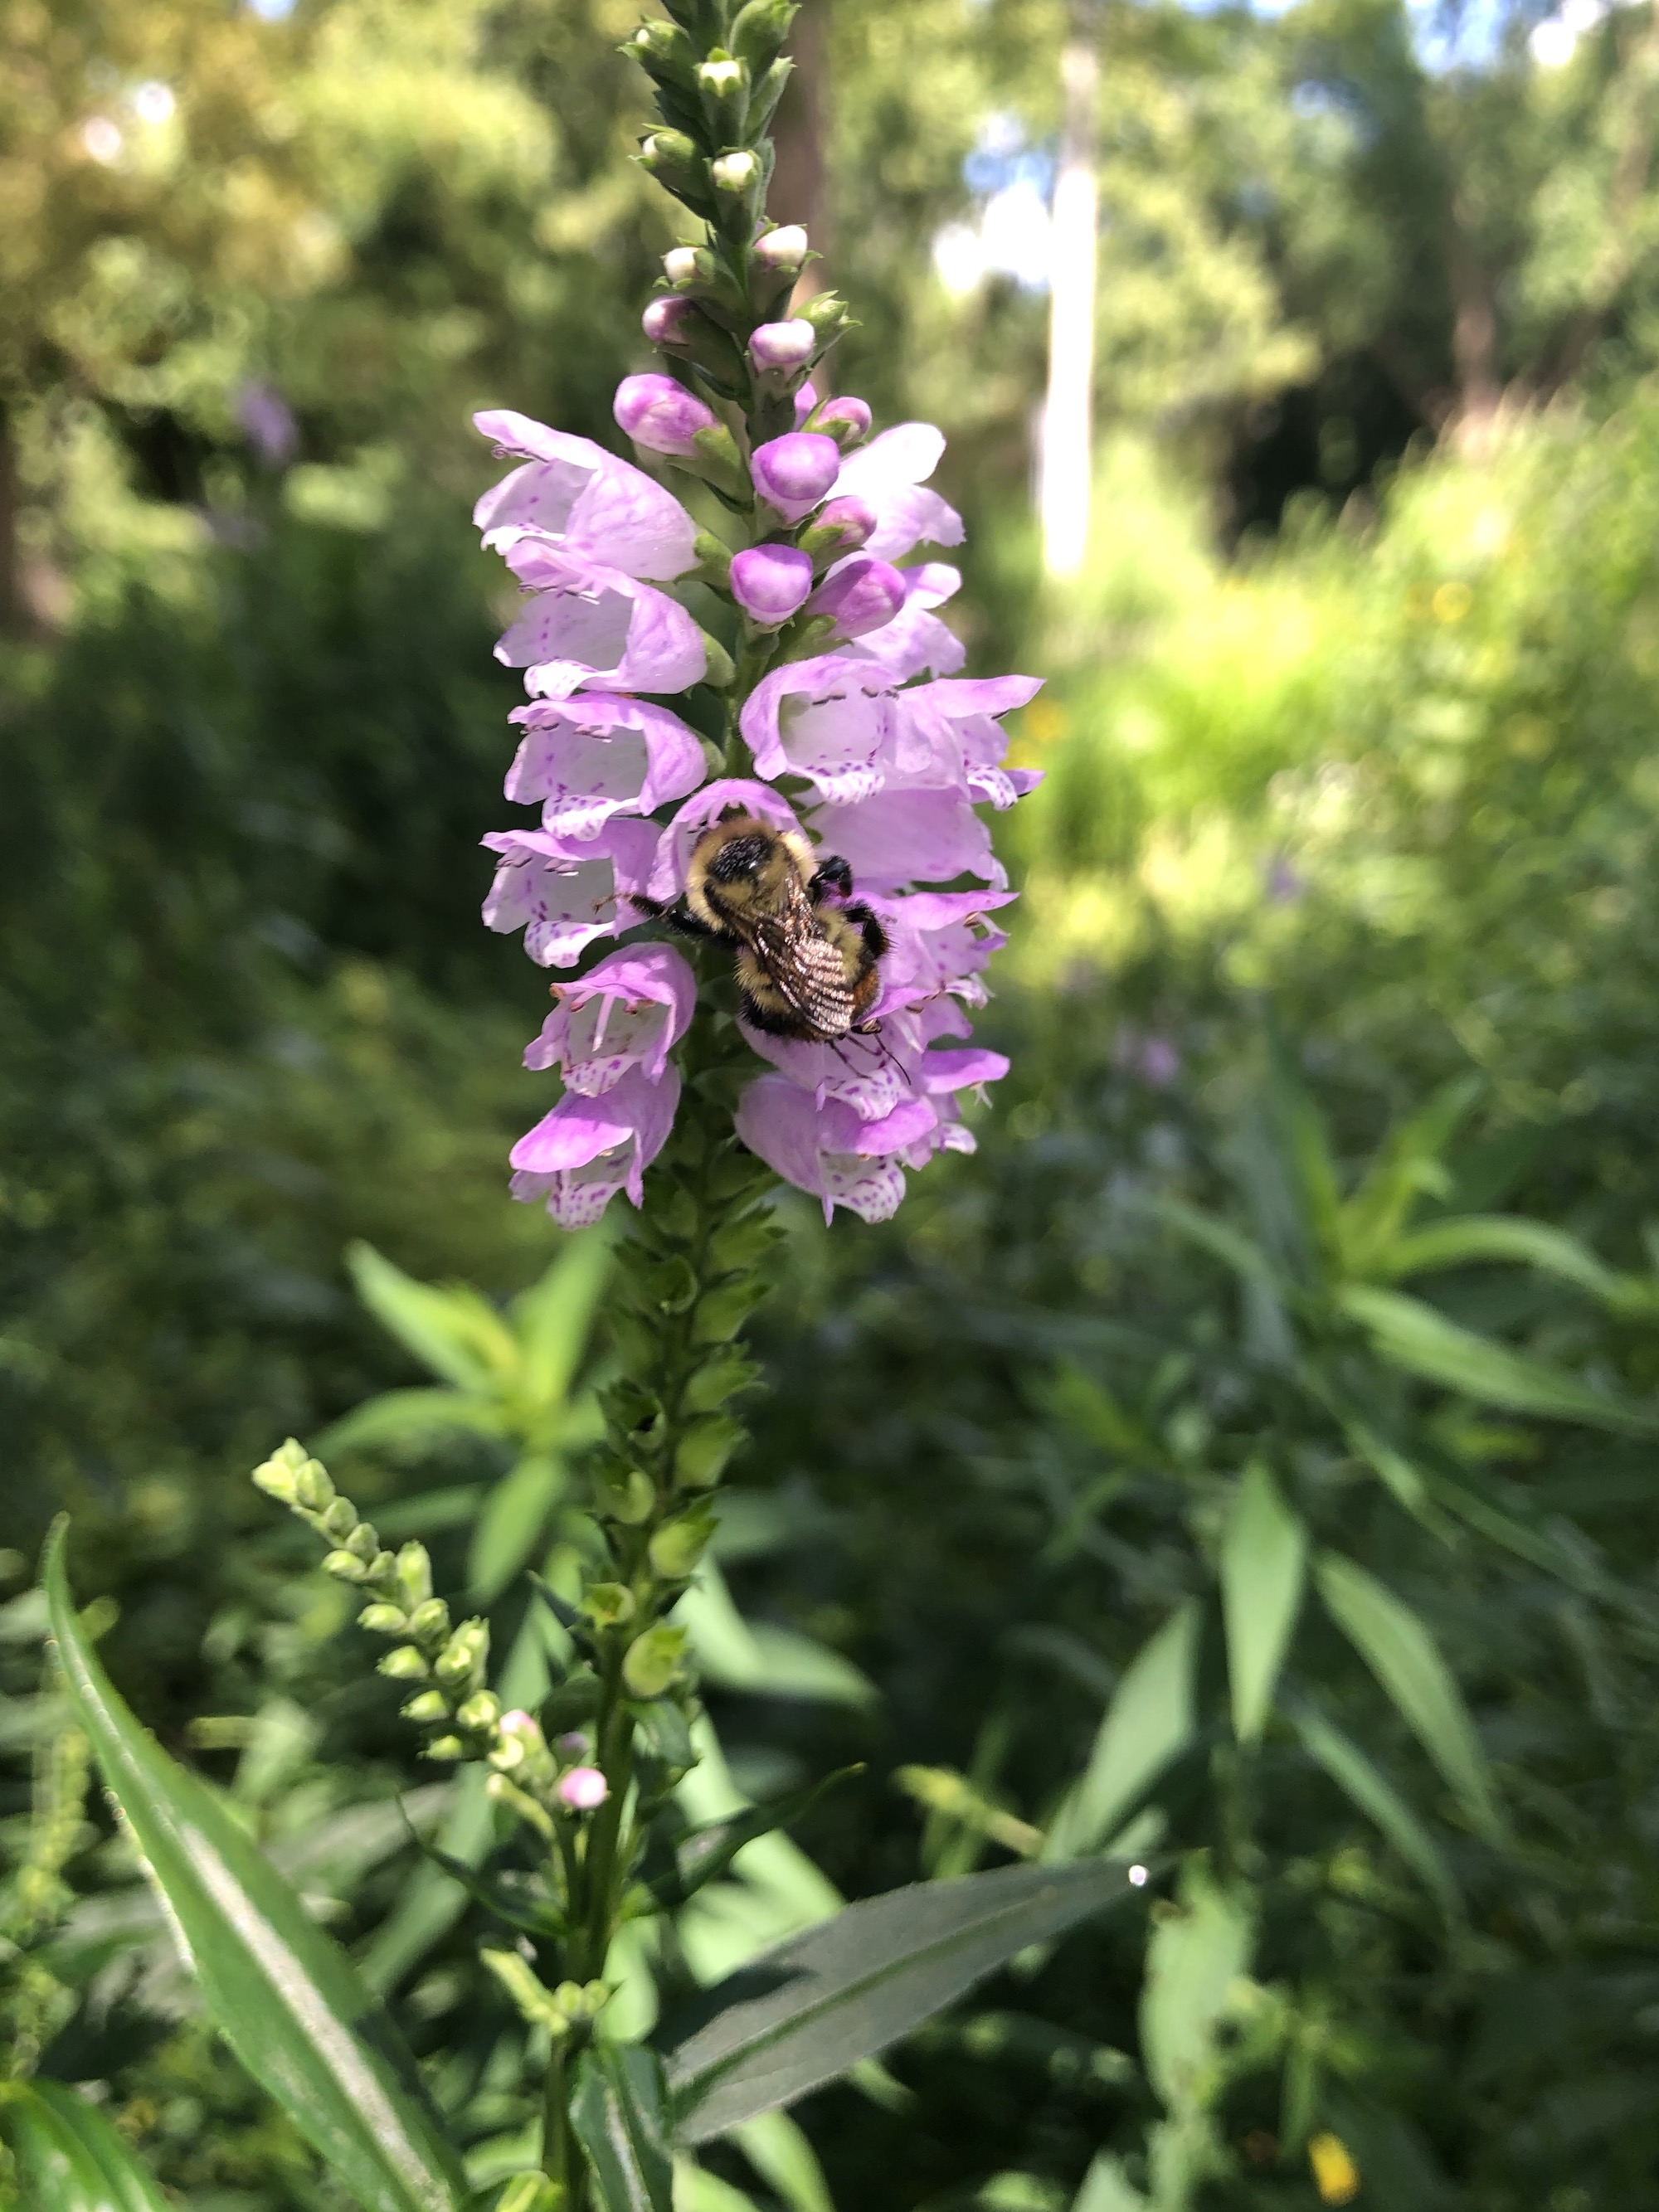 Obedient Plant in Thoreau Rain Garden in Madison, Wisconsin on July 27, 2020.